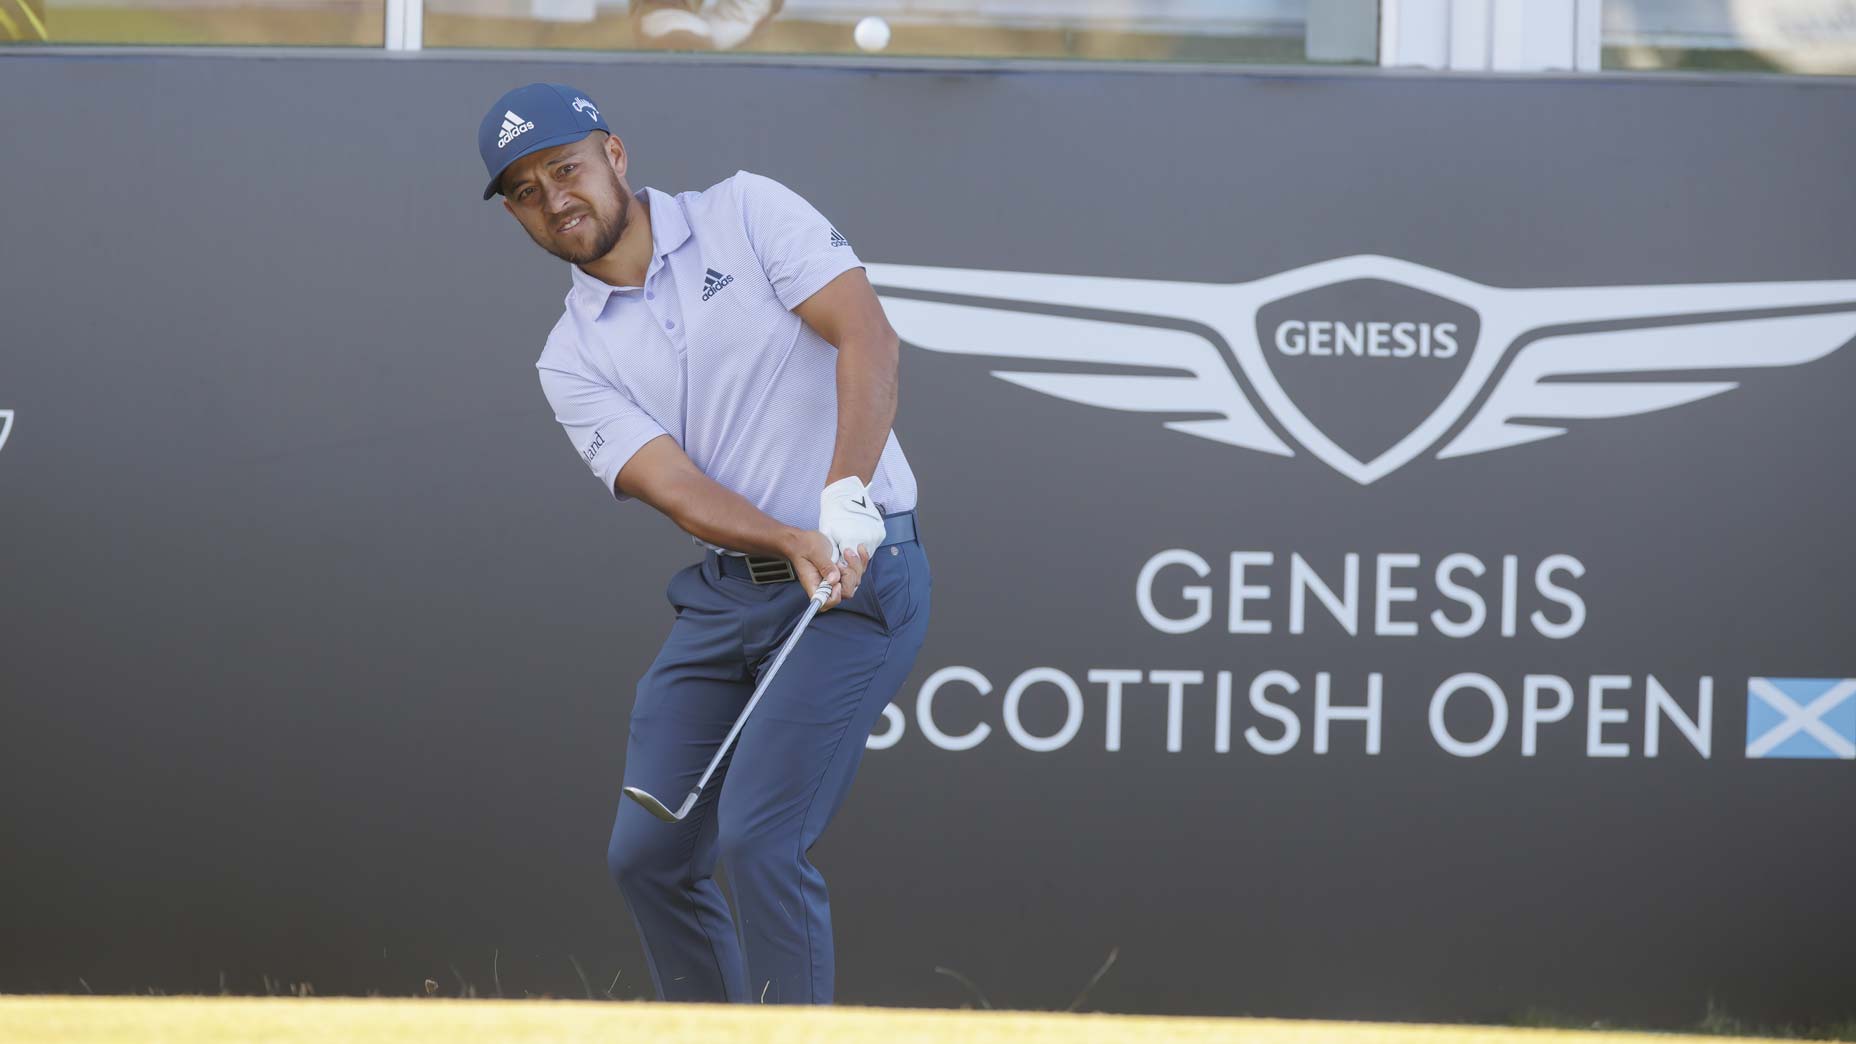 How to watch the 2022 Genesis Scottish Open on Sunday Round 4 live